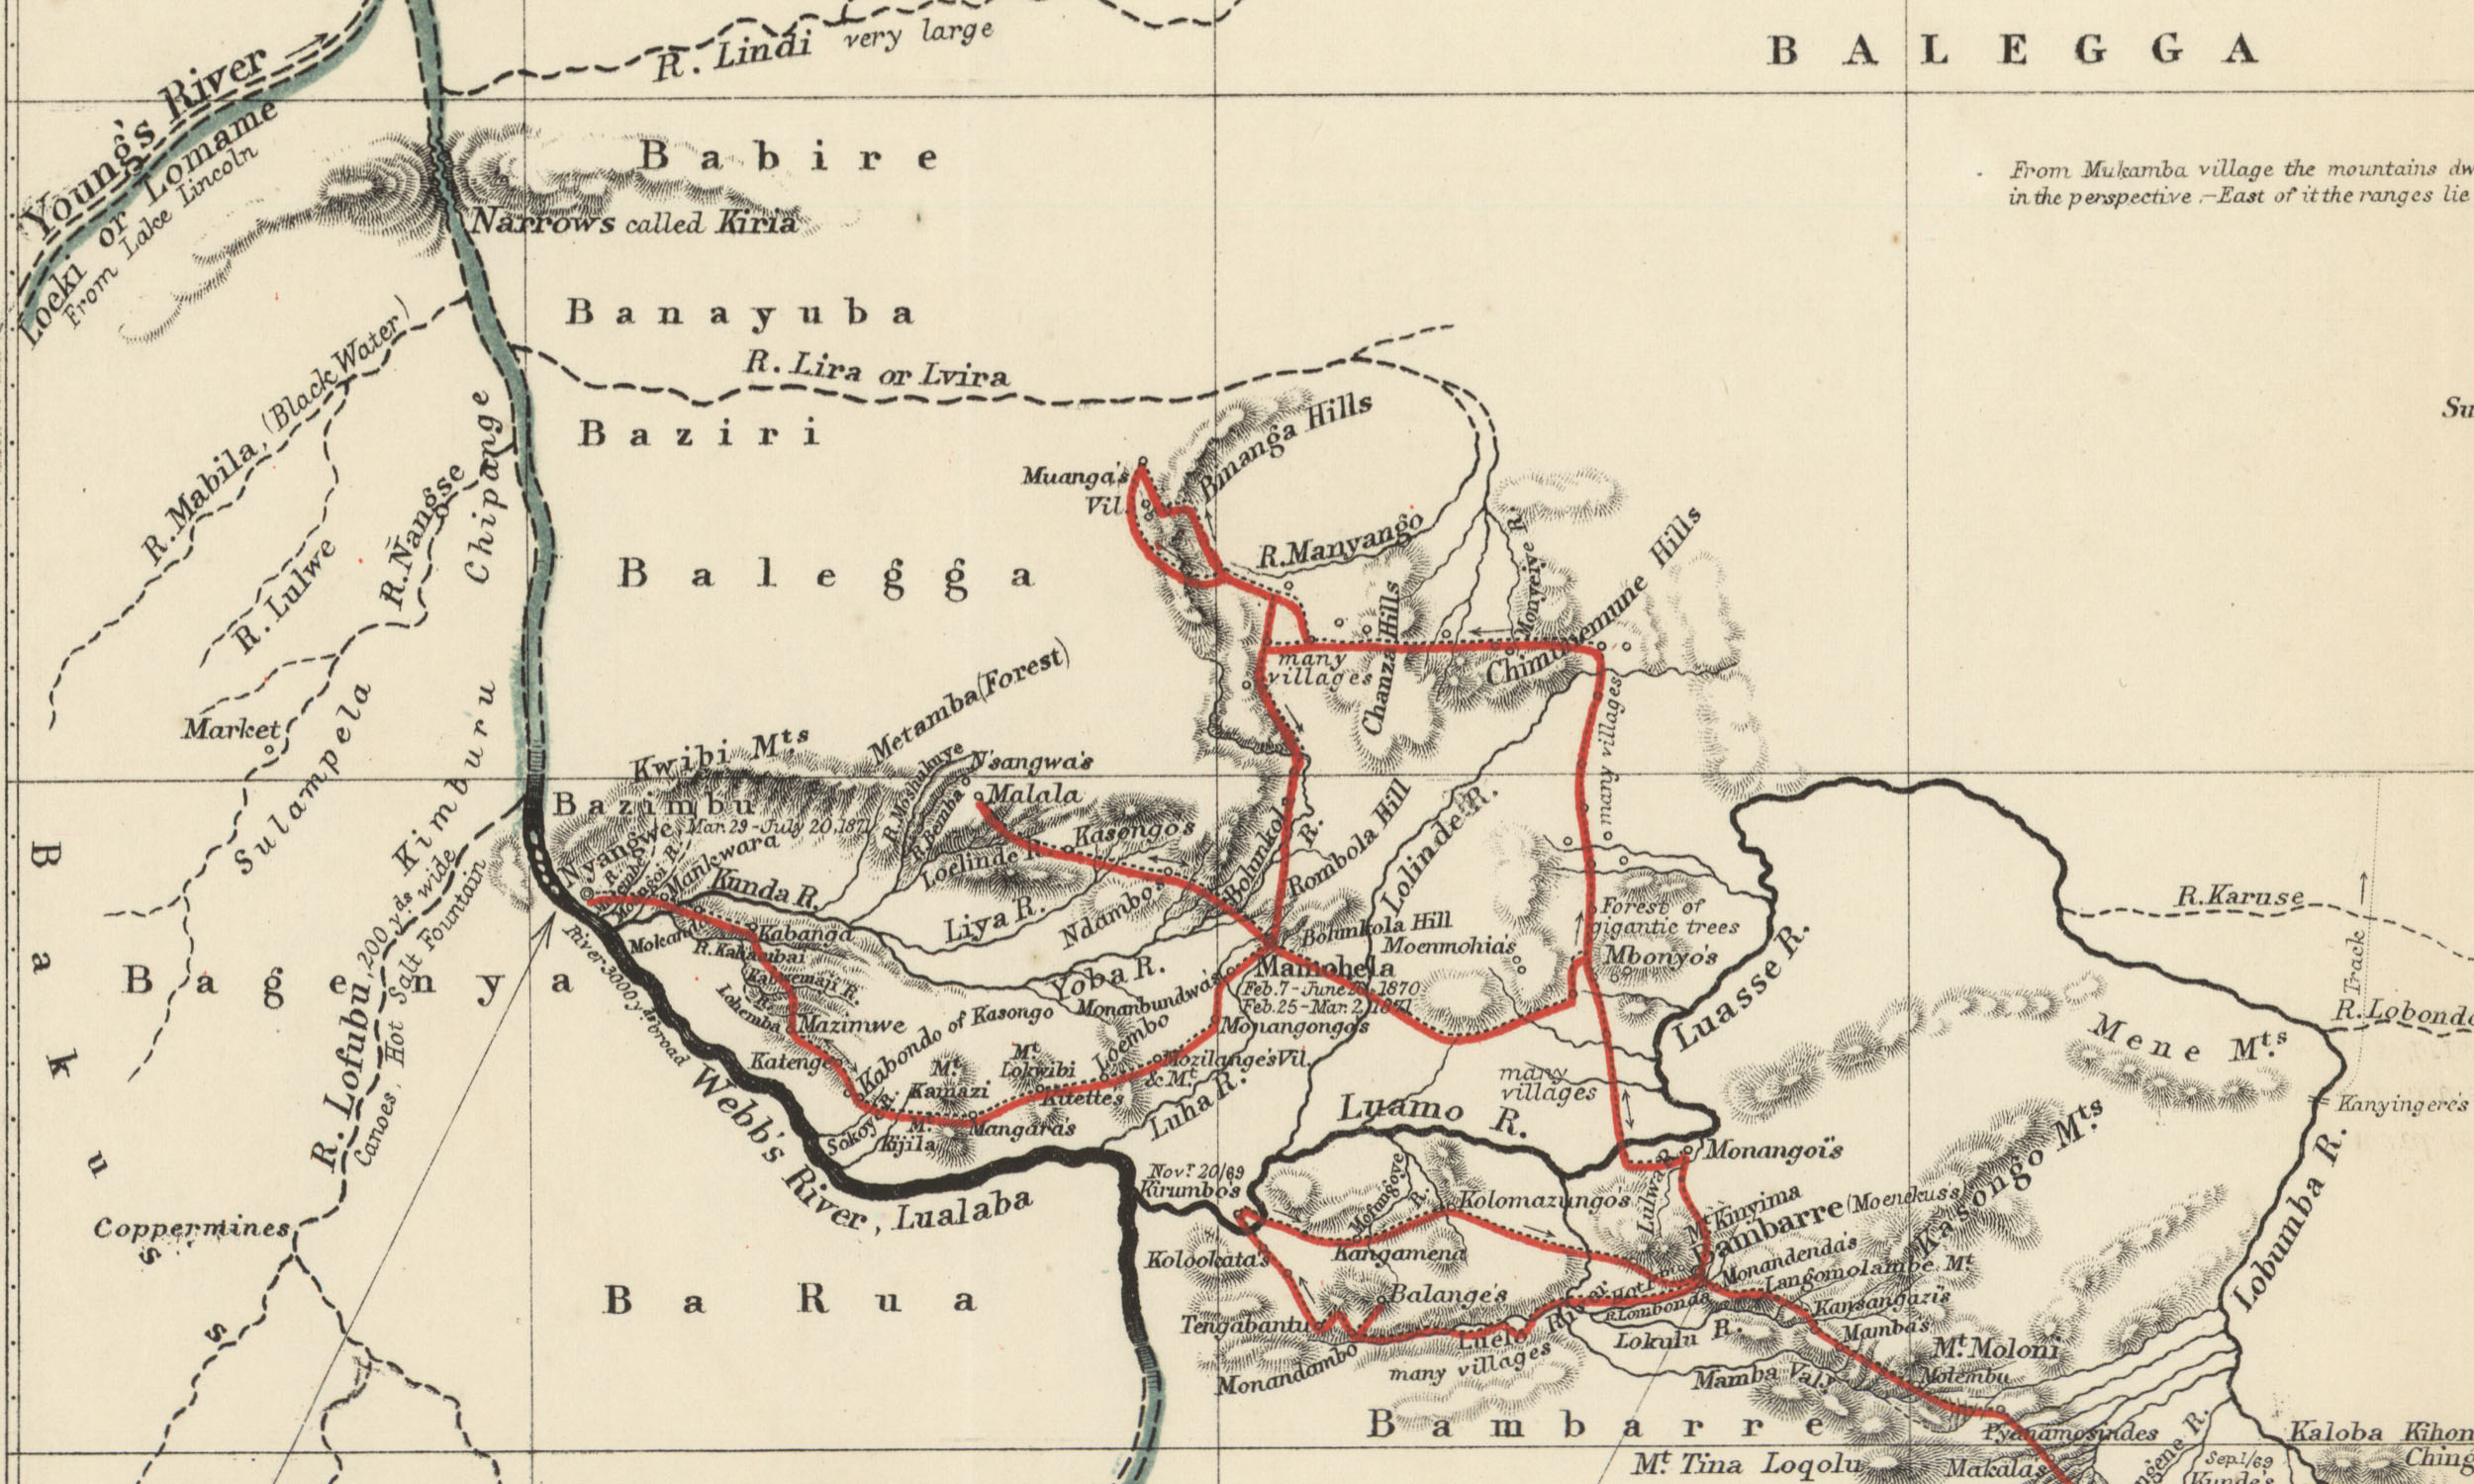 Large map from the Last Journals (Livingstone 1874), detail. Copyright National Library of Scotland. Creative Commons Share-alike 2.5 UK: Scotland (https://creativecommons.org/licenses/by-nc-sa/2.5/scotland/).